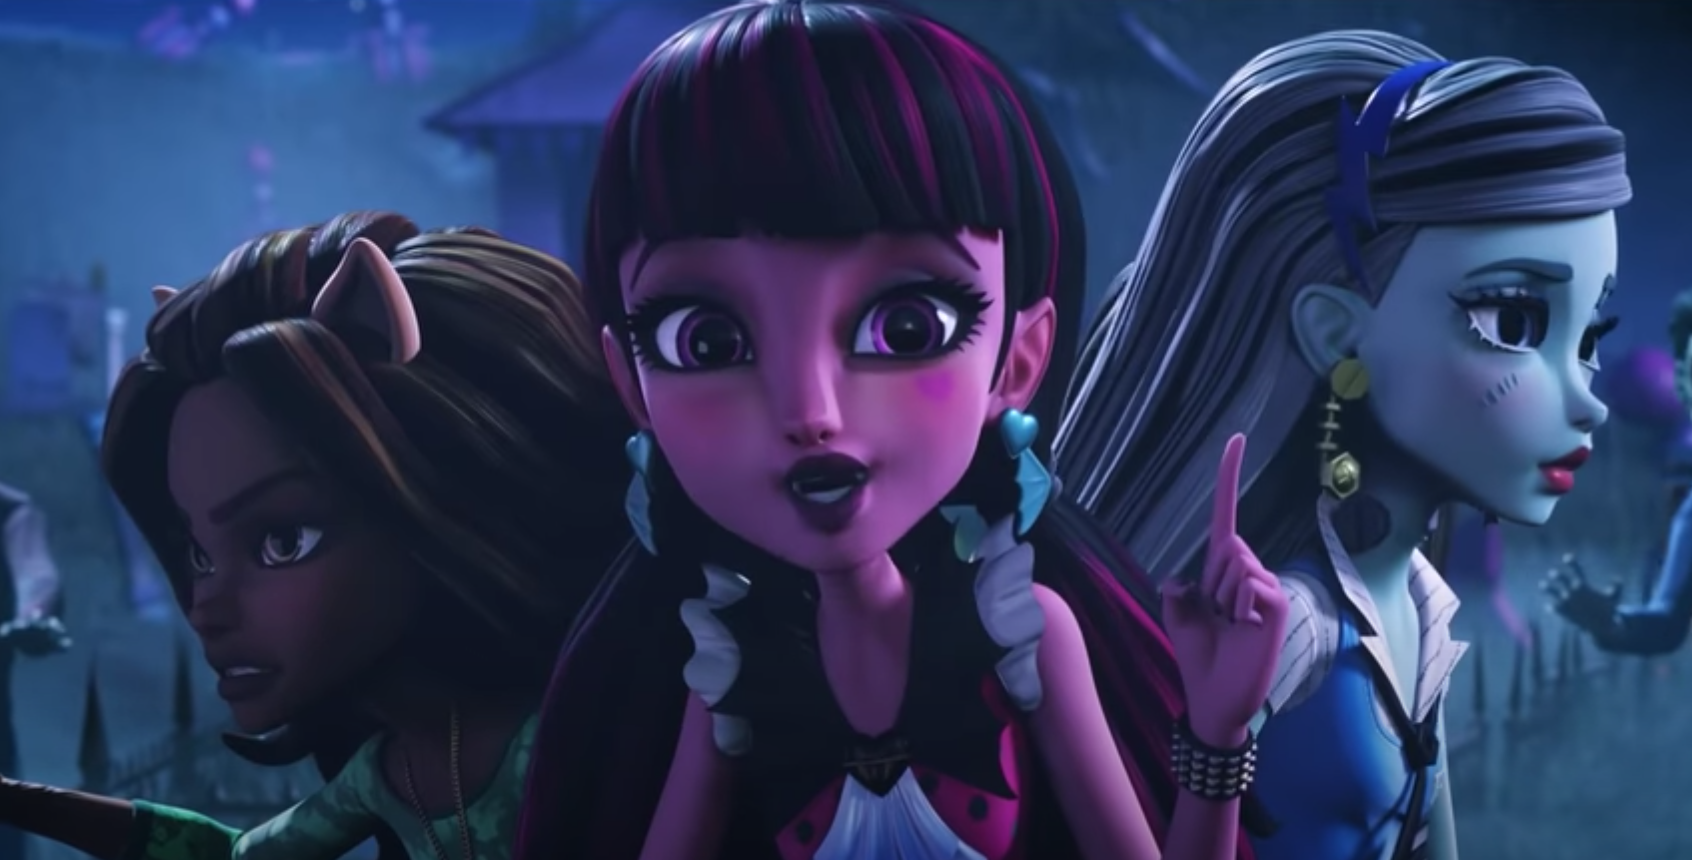 Monster High' Live-Action Musical Coming to Nickelodeon - mxdwn Movies